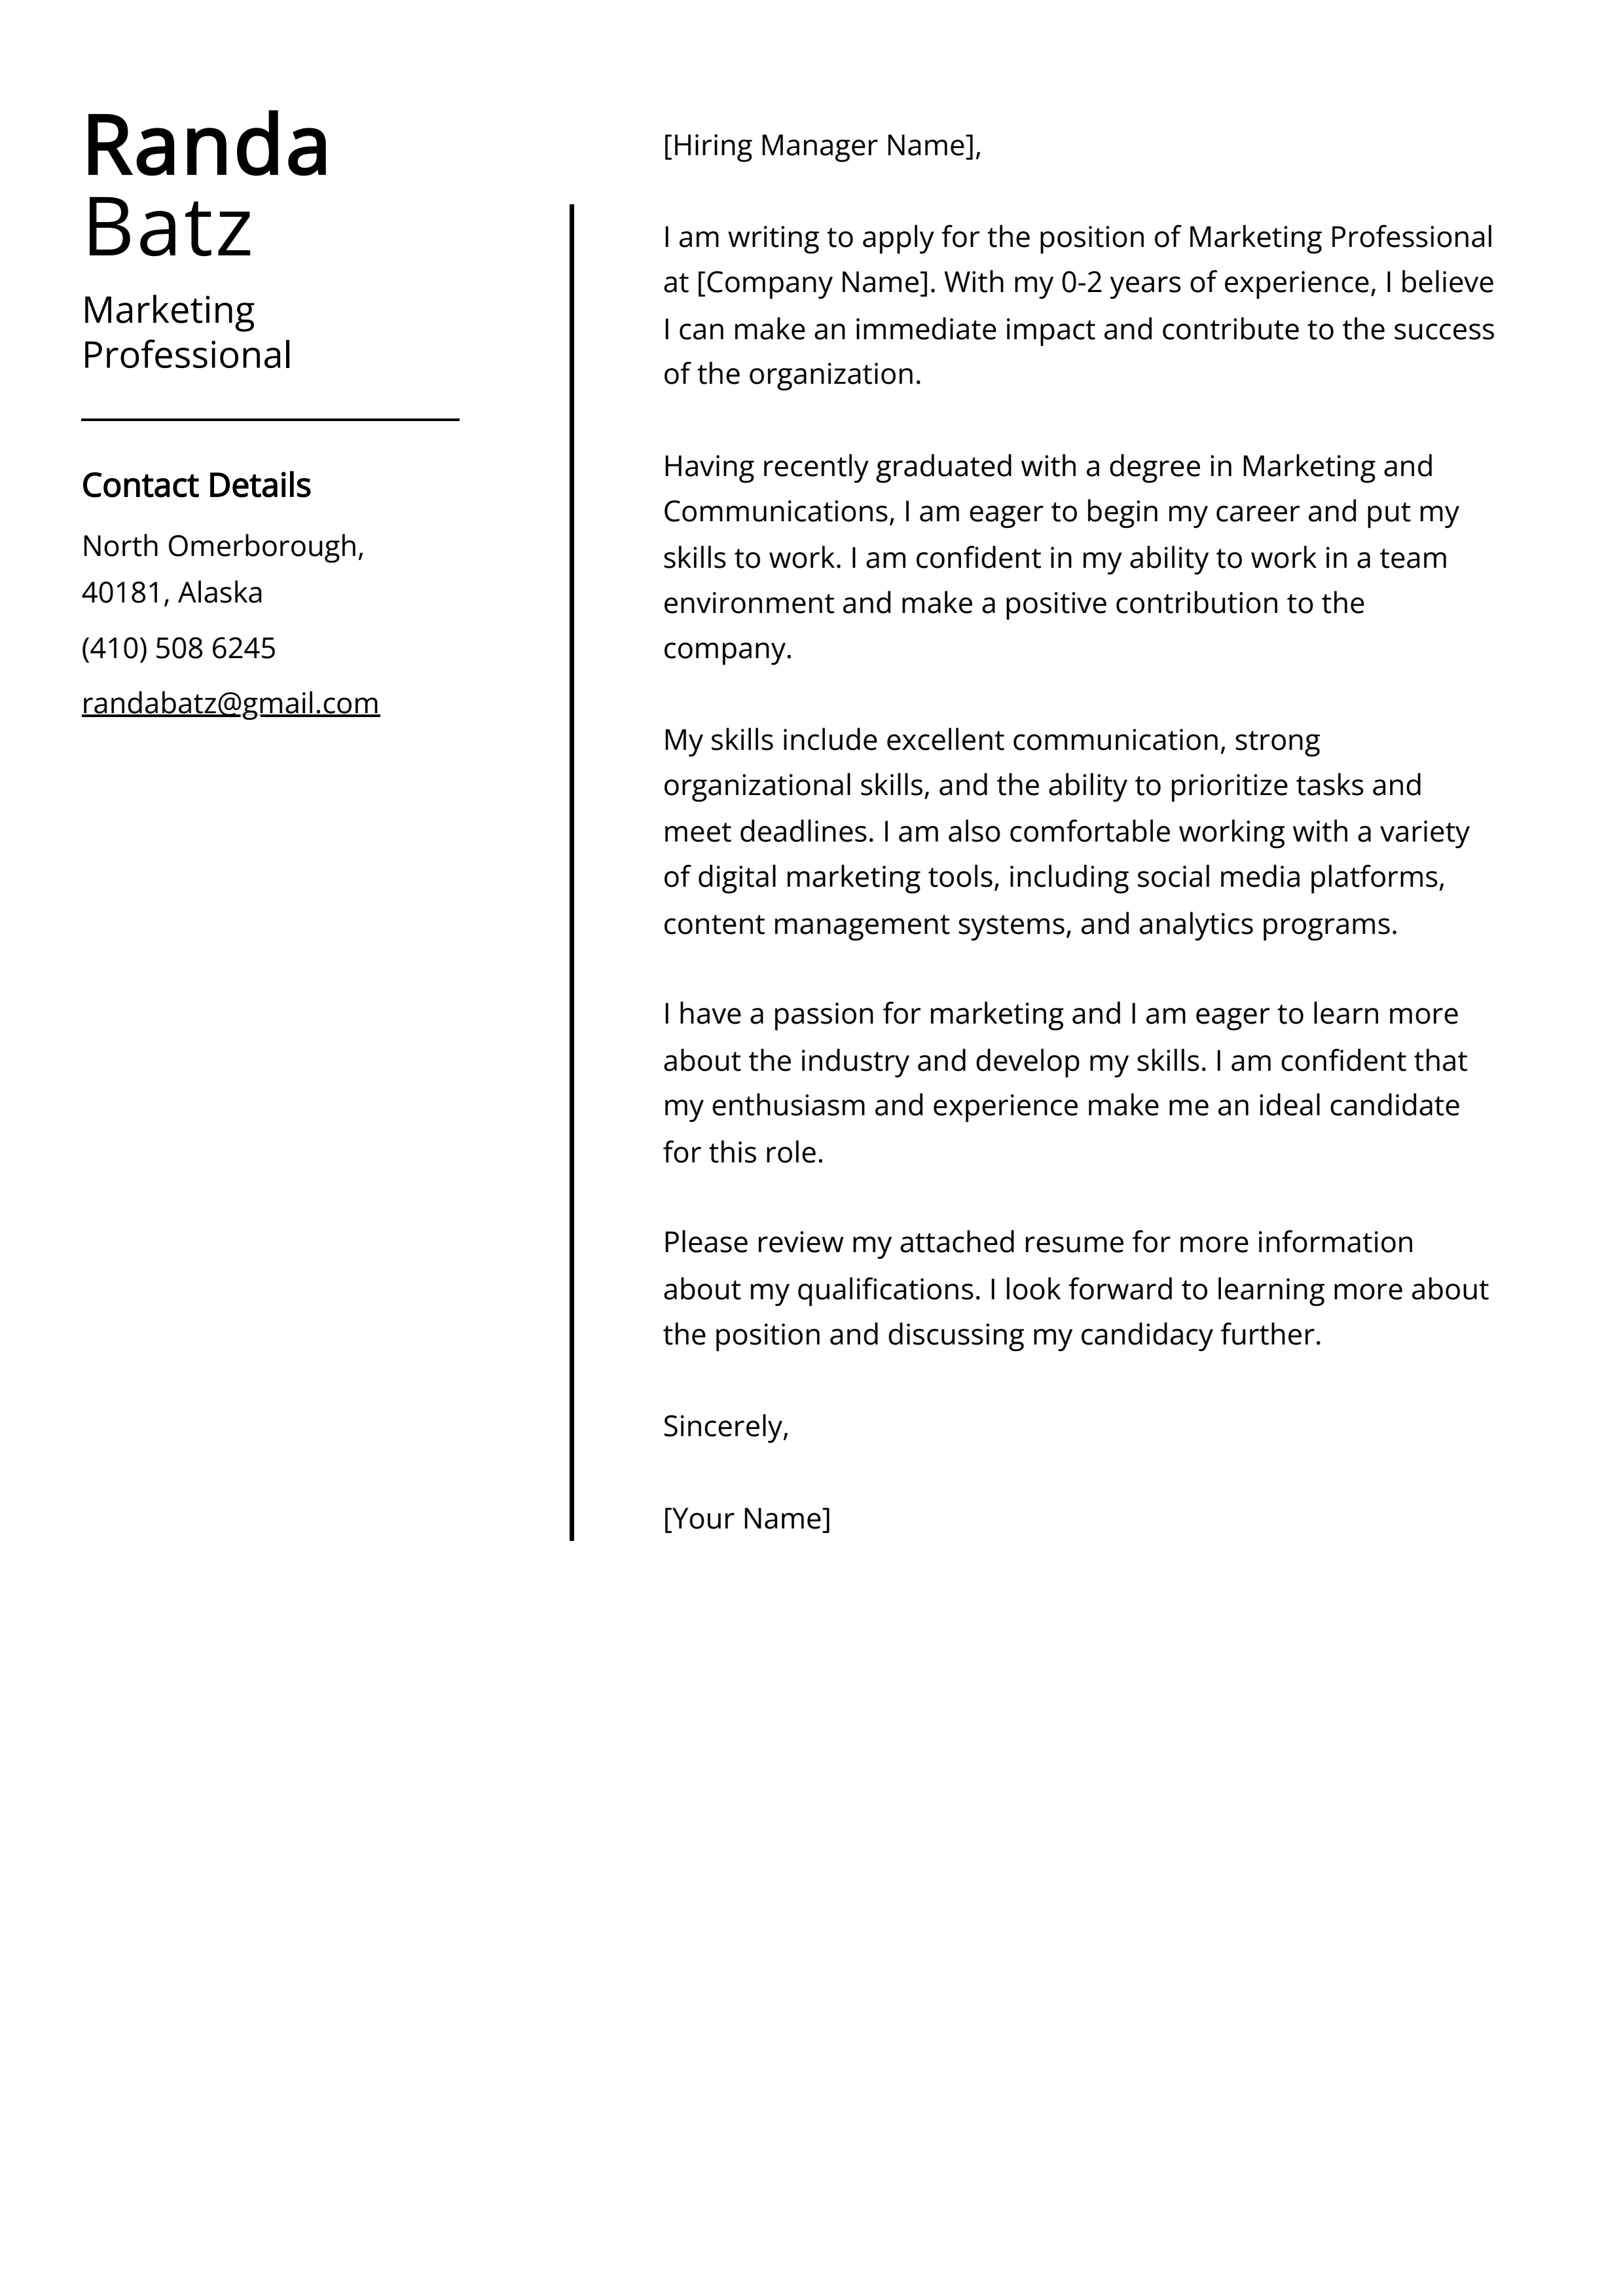 Marketing Professional Cover Letter Example